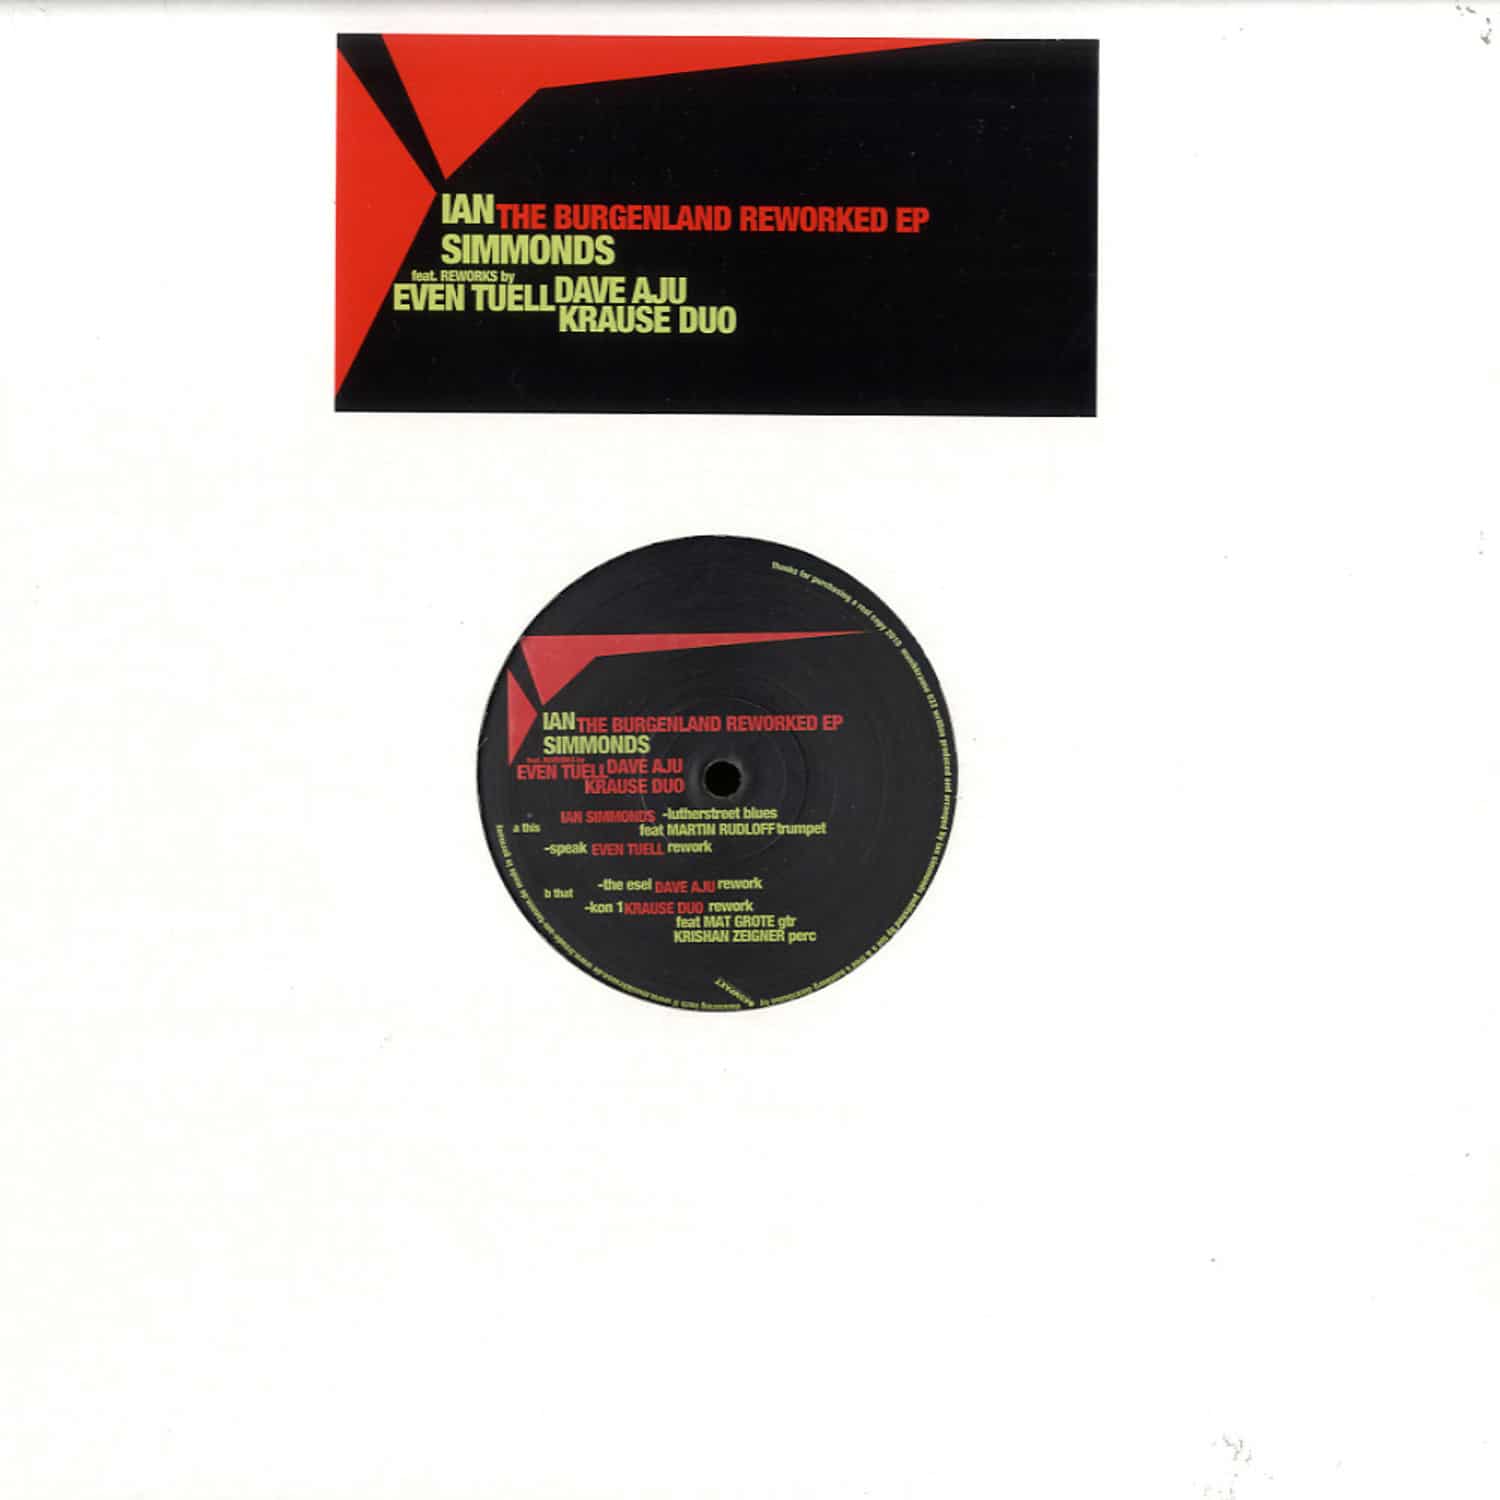 Ian Simmonds - THE BURGENLAND DUBS REWORKED